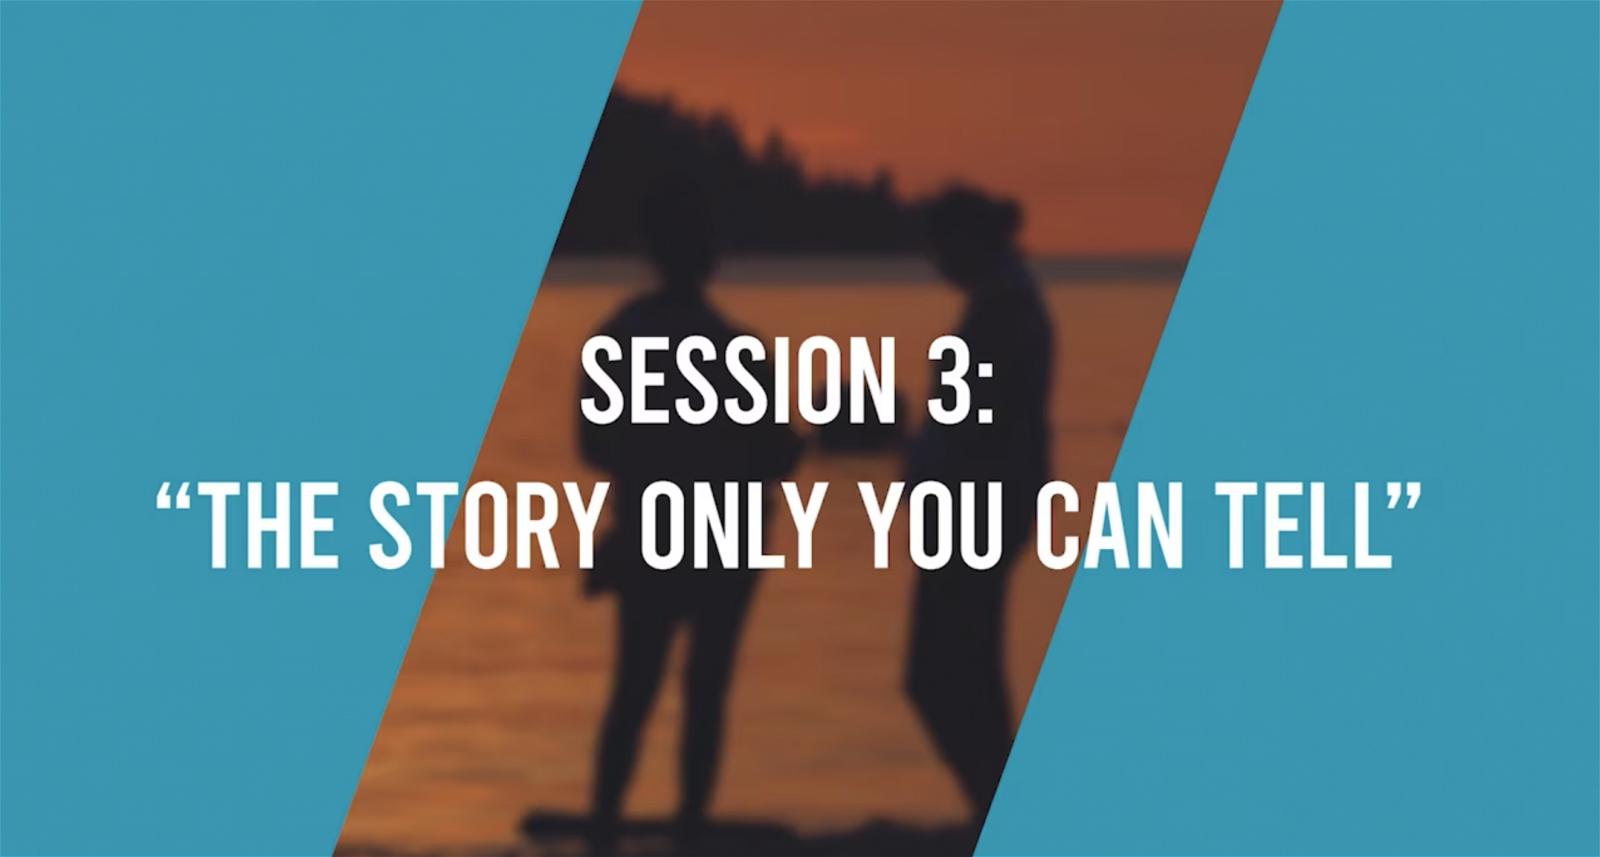 Session 3: The Story Only You Can Tell